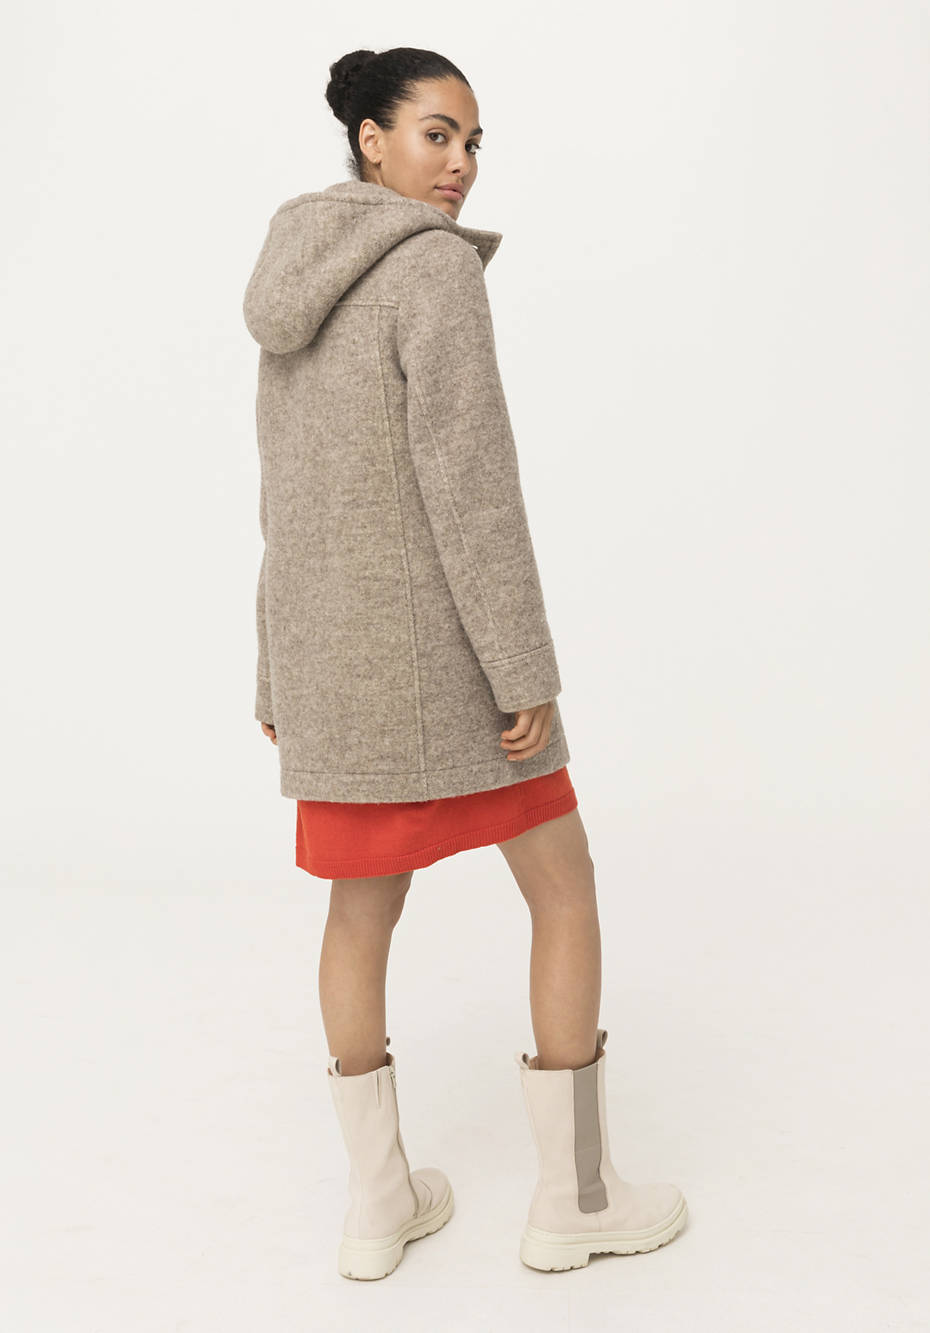 Rhön coat Limited by Nature made of pure new wool